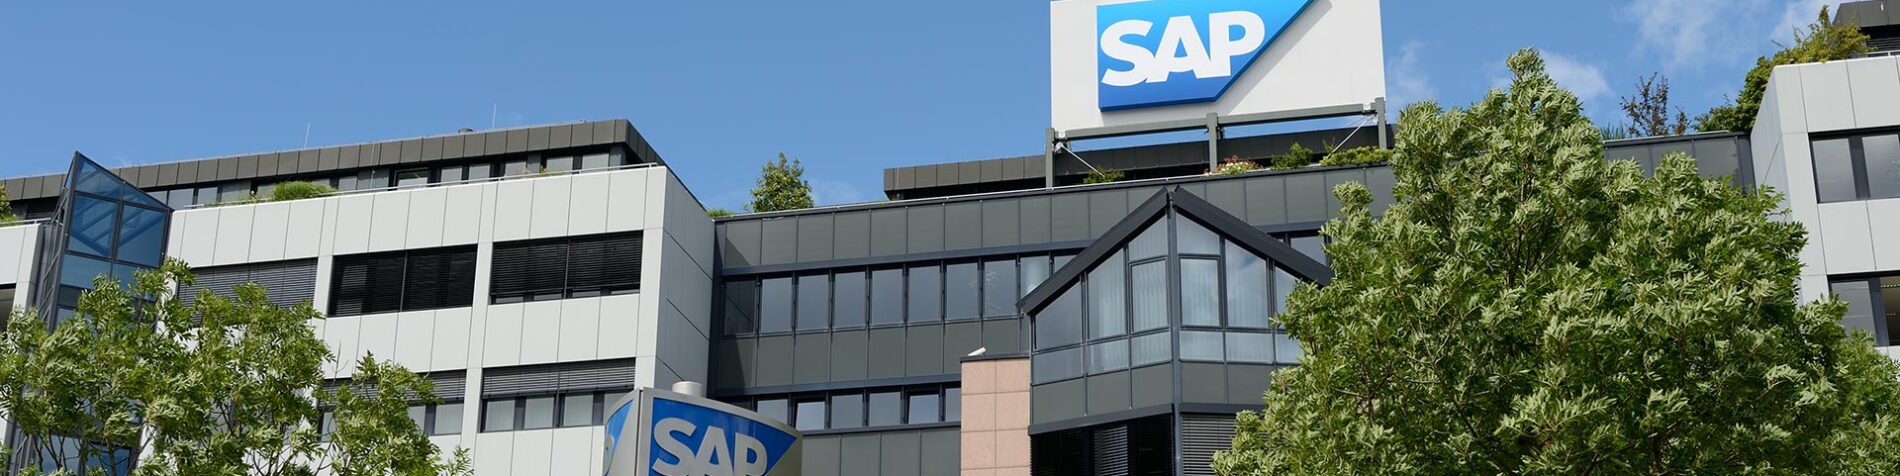 SAP Raises Dividend to €1.58; All Agenda Items Passed at Virtual Annual General Meeting of Shareholders